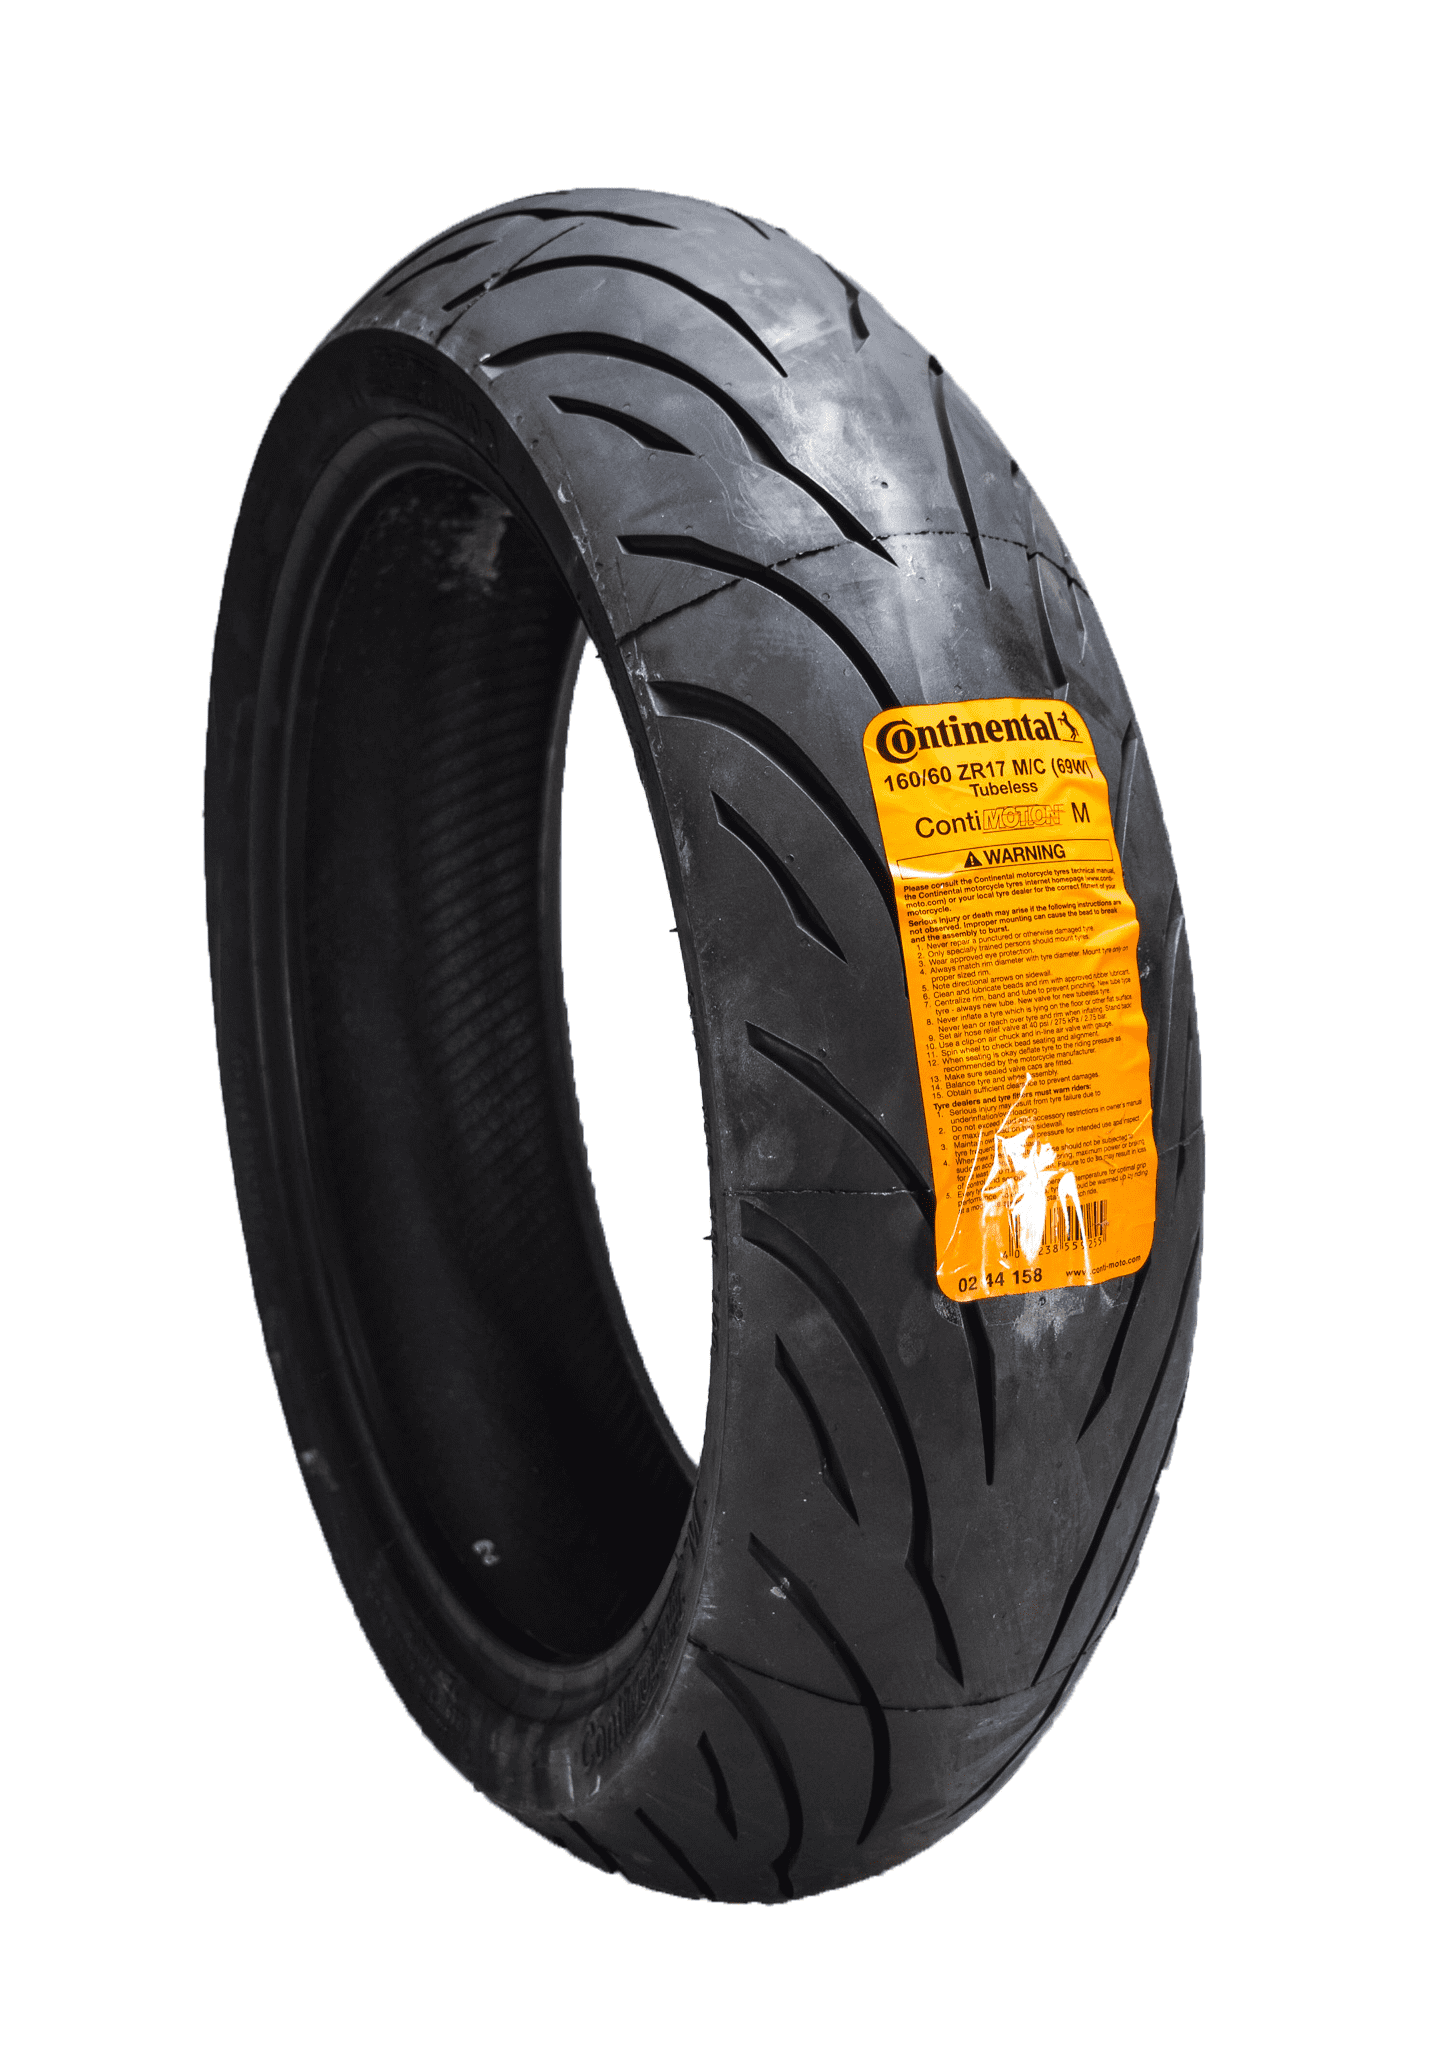 Continental Conti Sport Attack 2 180/55ZR-17 Hypersport Radial Rear Tire